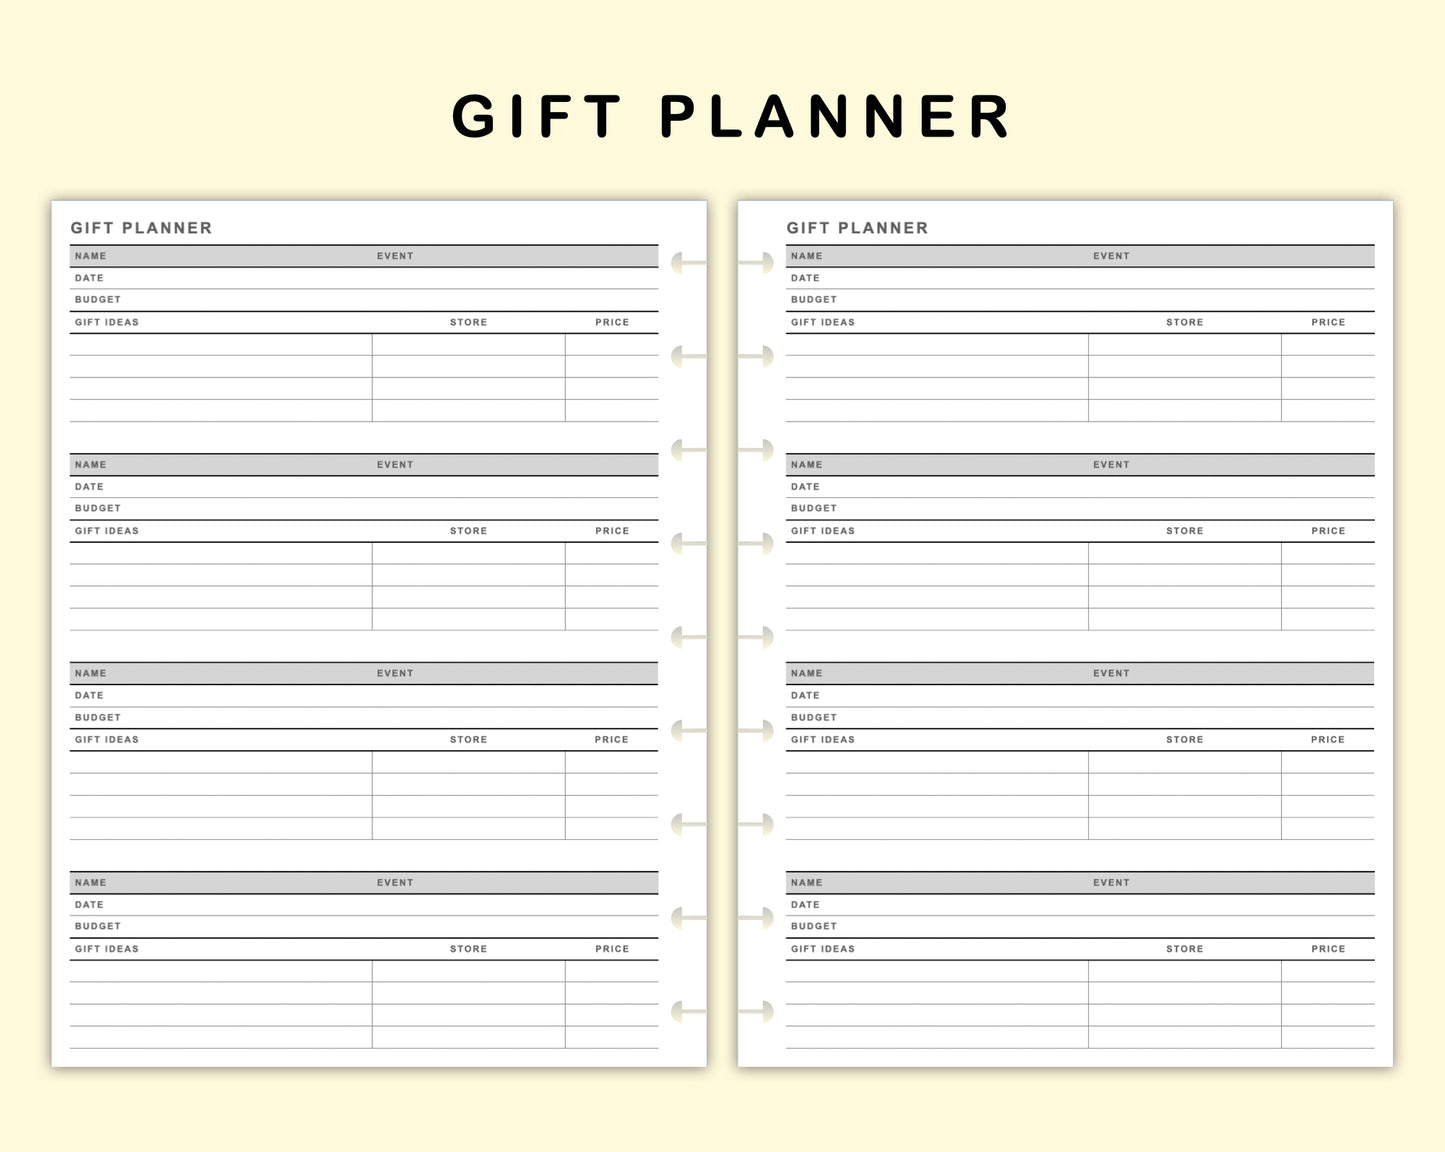 Classic HP Inserts - Gift Planner